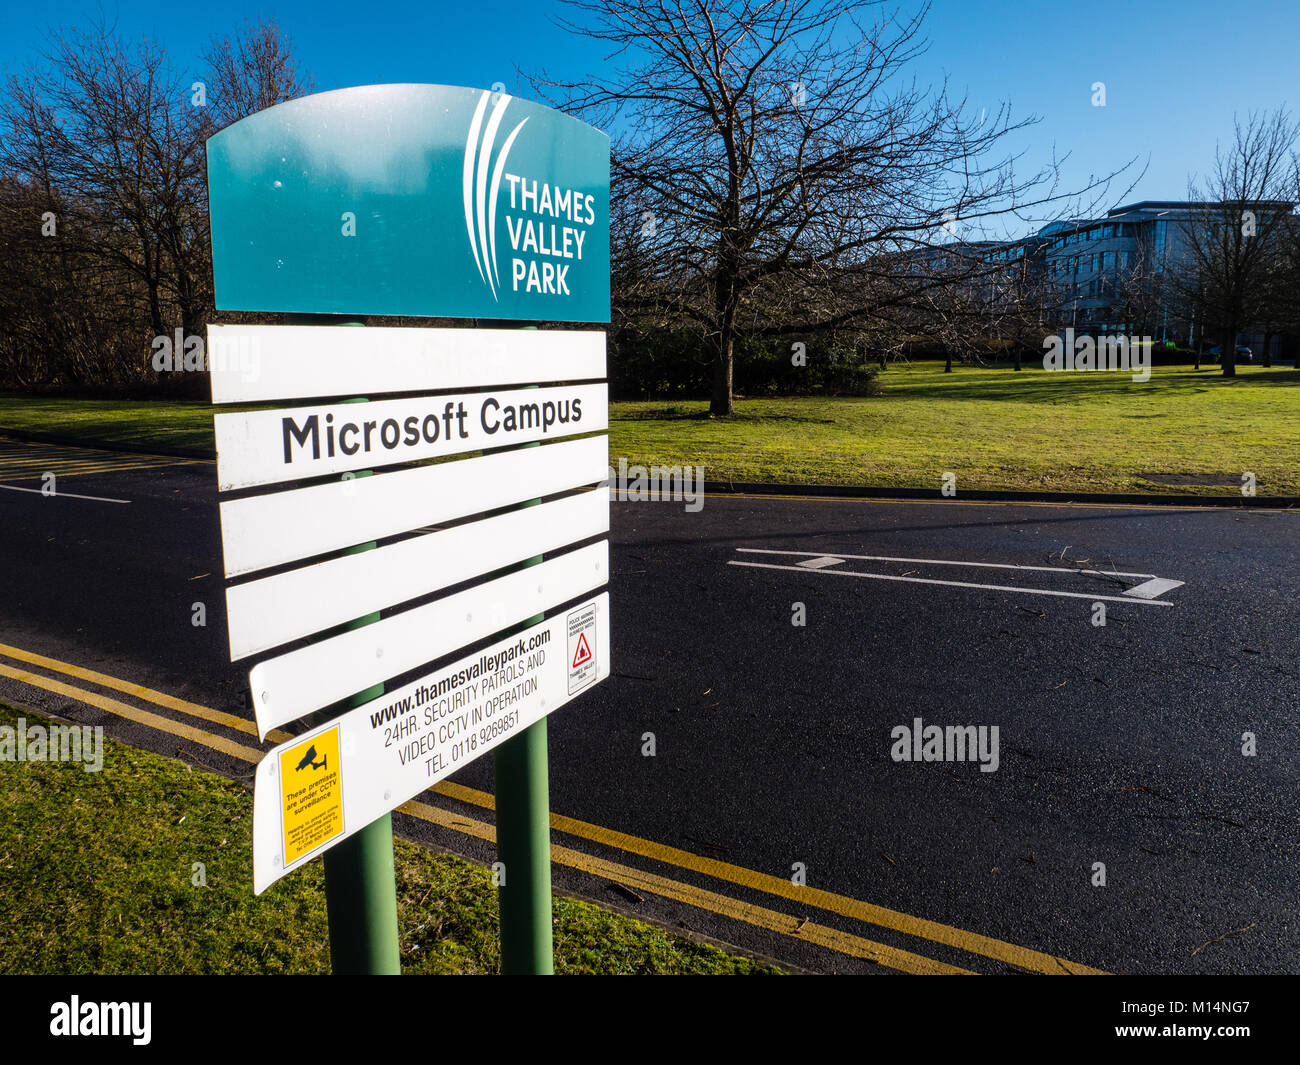 Microsoft Campus Sign, Thames Valley Business Park, Reading, Berkshire, England Stock Photo